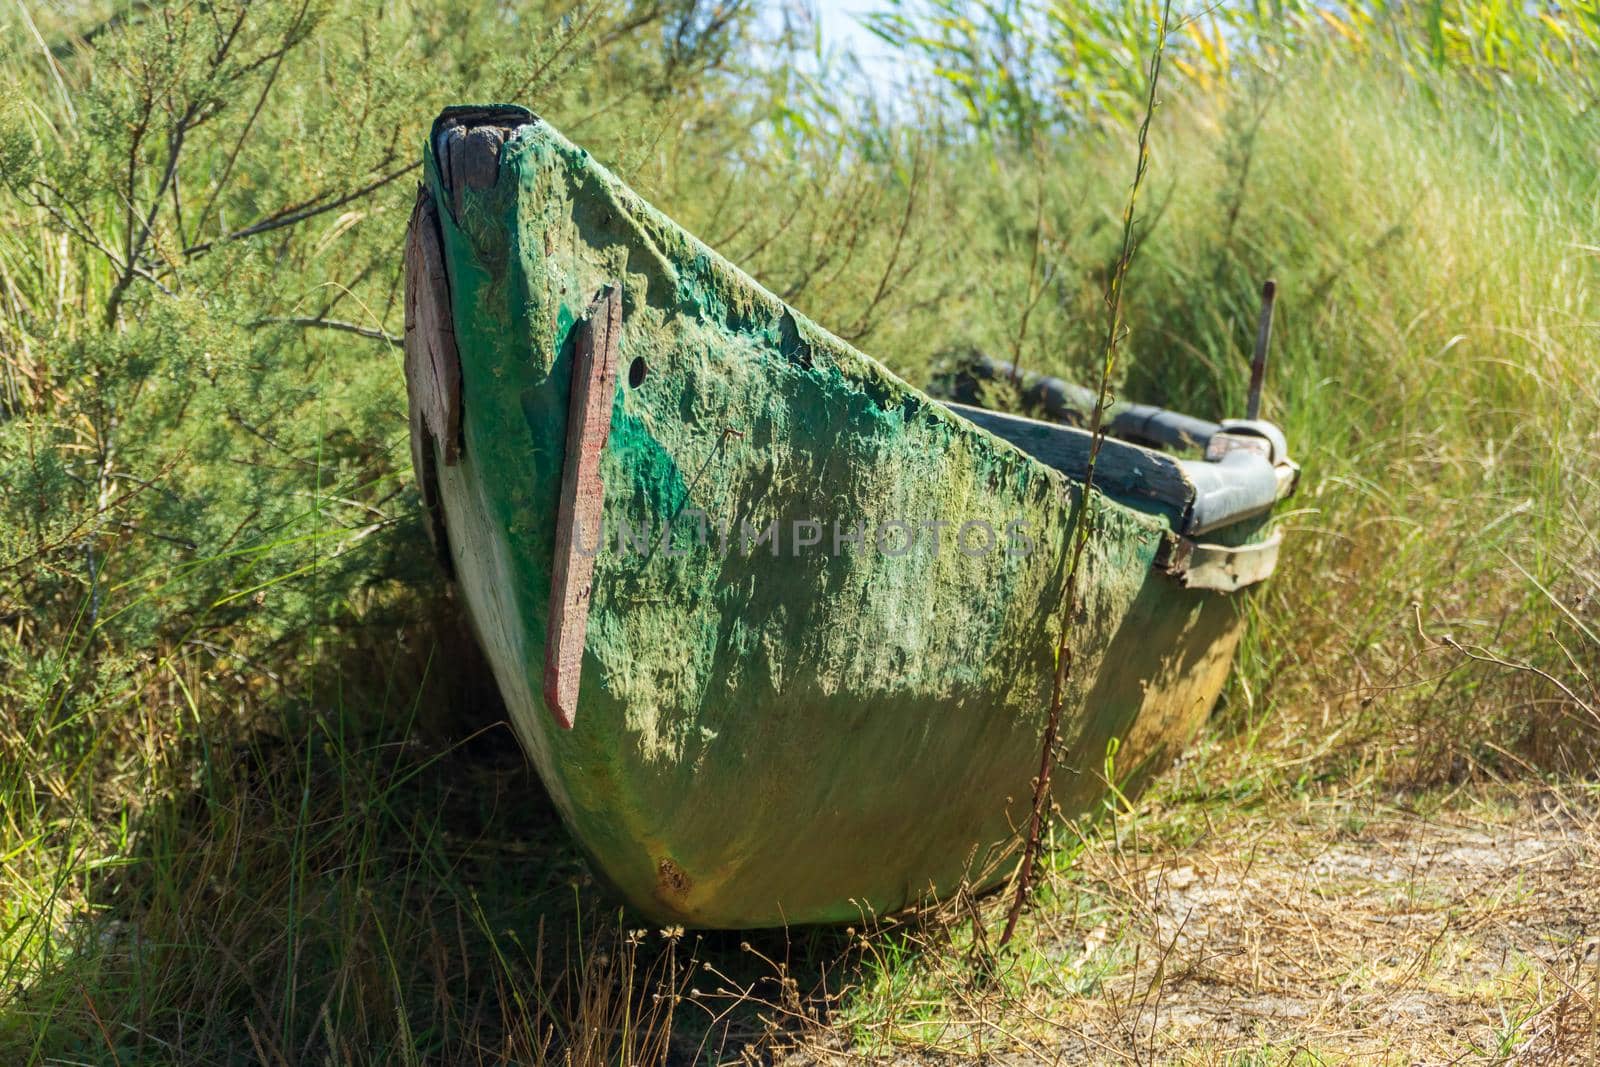 An old wooden boat abandoned in the thickets on the river bank close up